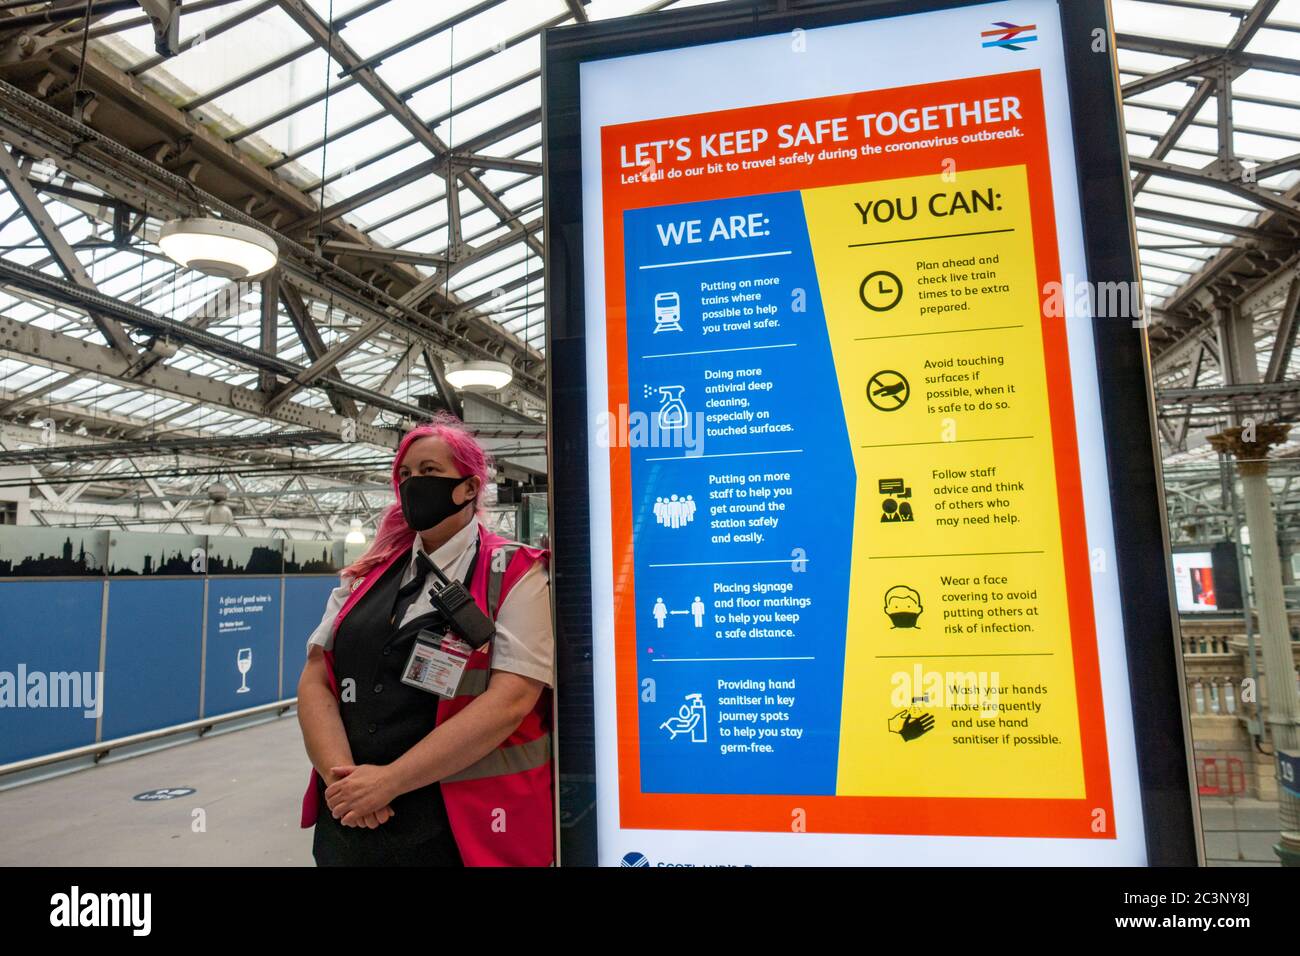 Edinburgh, Scotland, UK. 21 June, 2020. On Monday 22 June it will be mandatory for passengers to wear face coverings when travelling on railways in Scotland. Waverley Station in Edinburgh is preparing by installing warning signs and advisory notices through the station. Many customer service assistants are also on duty to advise the travelling public.   Iain Masterton/Alamy Live News Stock Photo